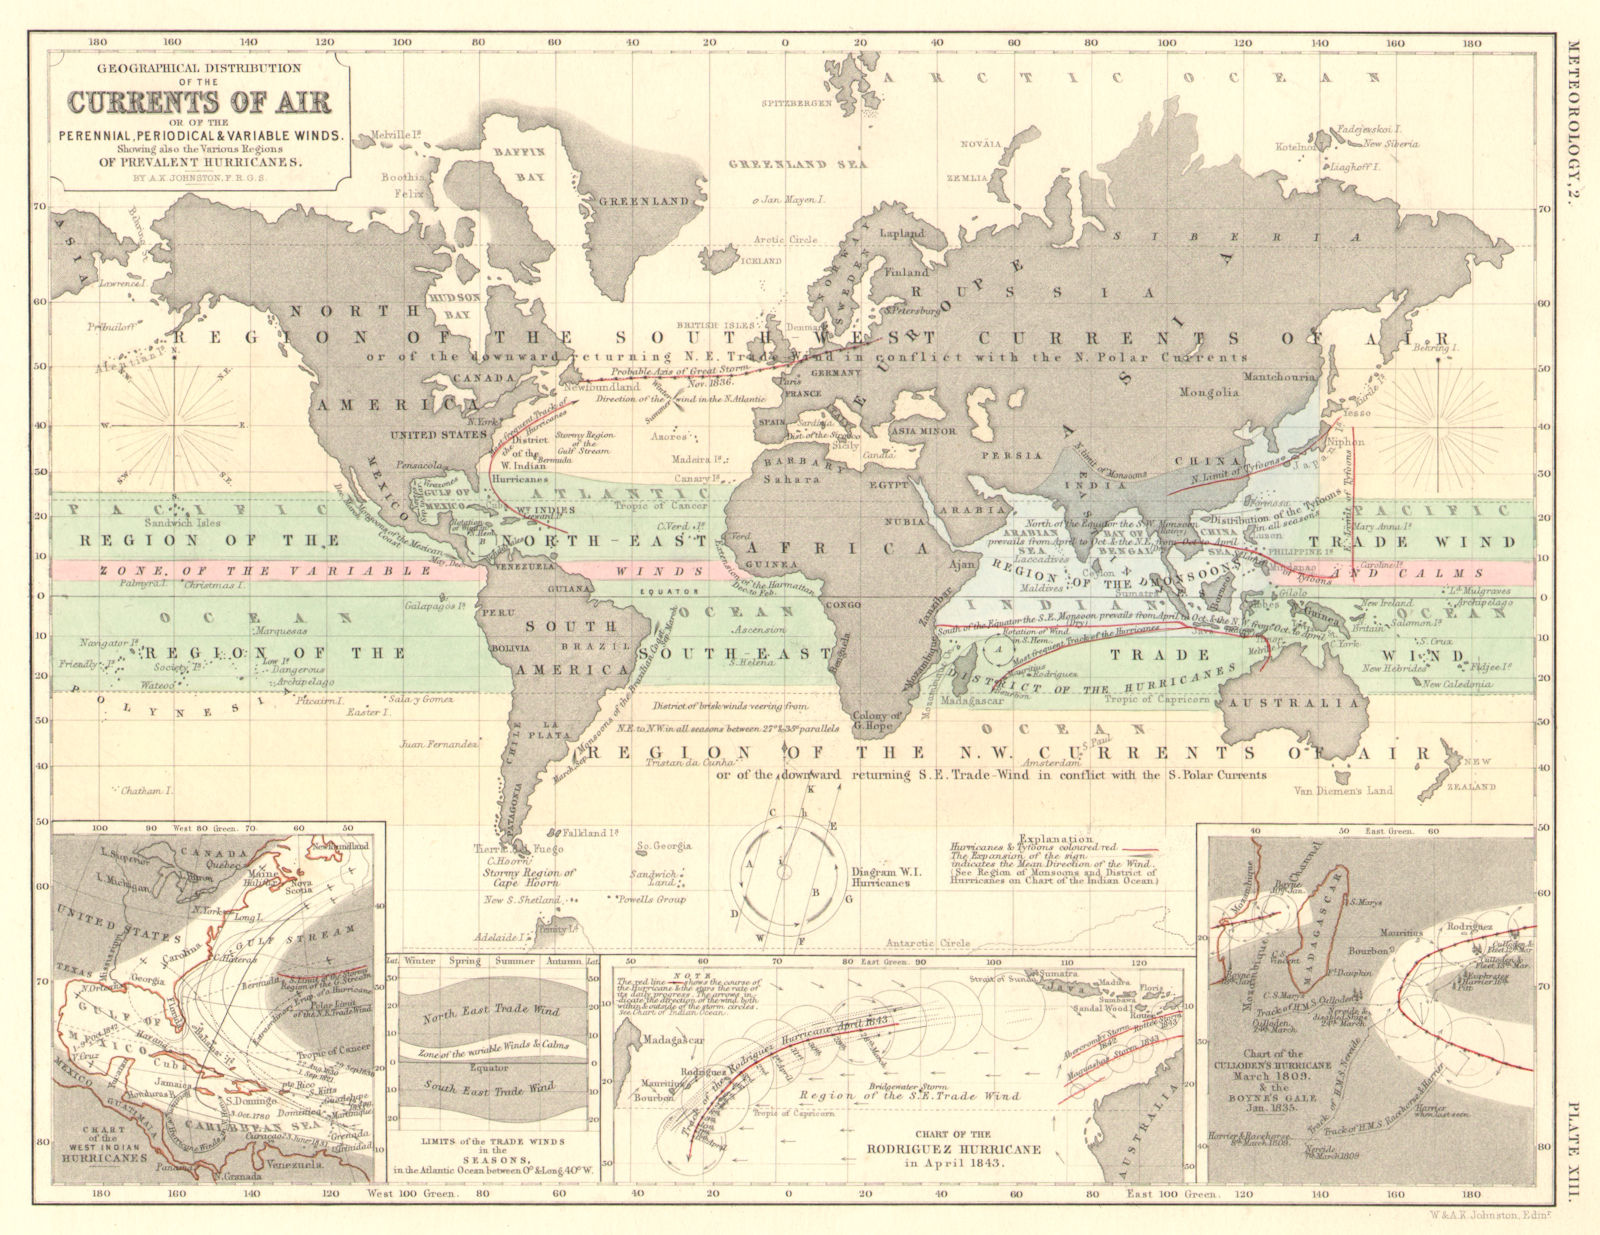 WORLD. Air current & wind distribution. Hurricane tracks. Trade winds 1850 map